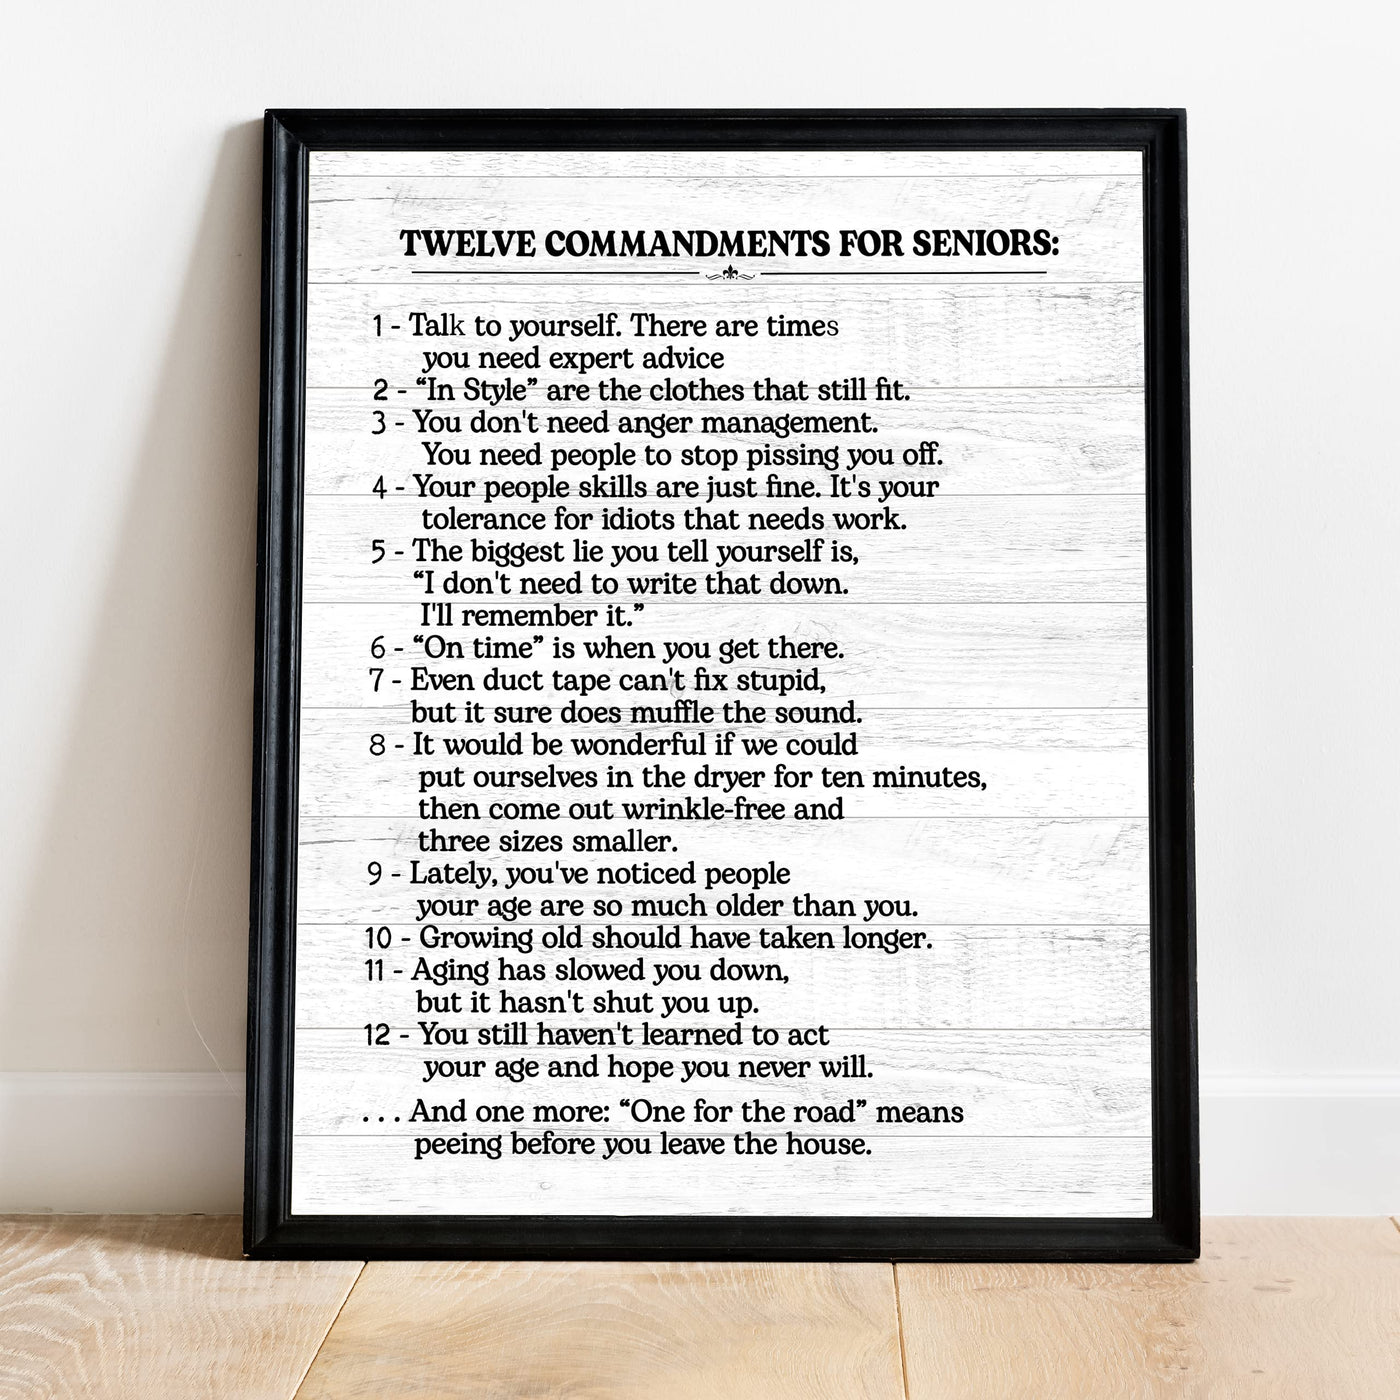 12 Commandments for Seniors Funny Inspirational Quotes -11 x 14" Vintage Sayings Wall Art Print -Ready to Frame. Rustic Wood Design Decor. Home-Kitchen-Office-Patio & Gifts! Printed on Photo Paper.